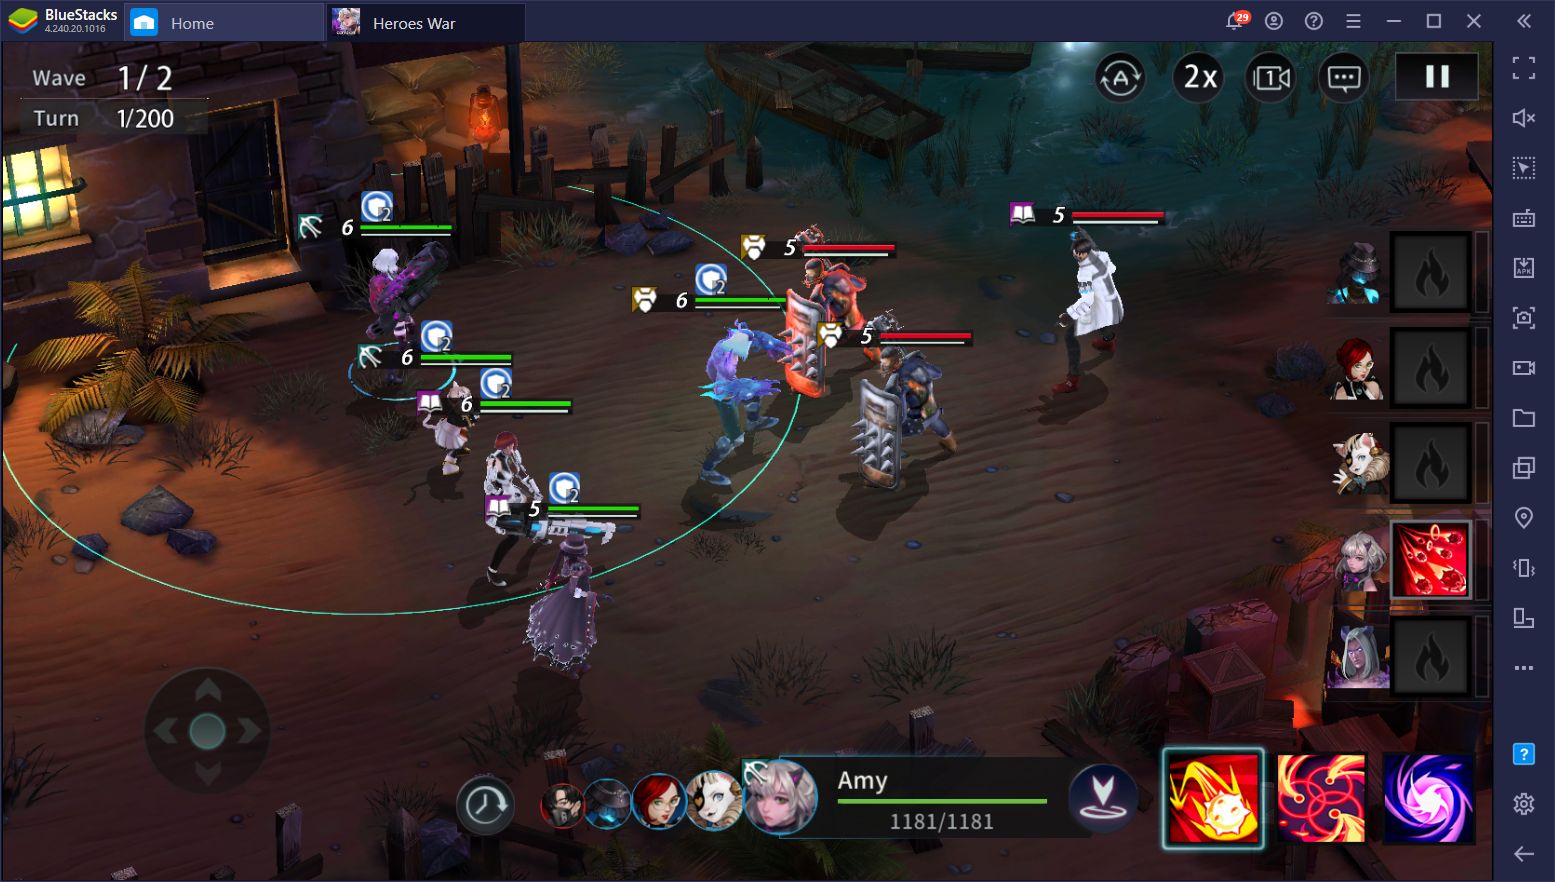 Heroes War: Counterattack on PC - How to Use BlueStacks for Easy Rerolls and Improved Controls